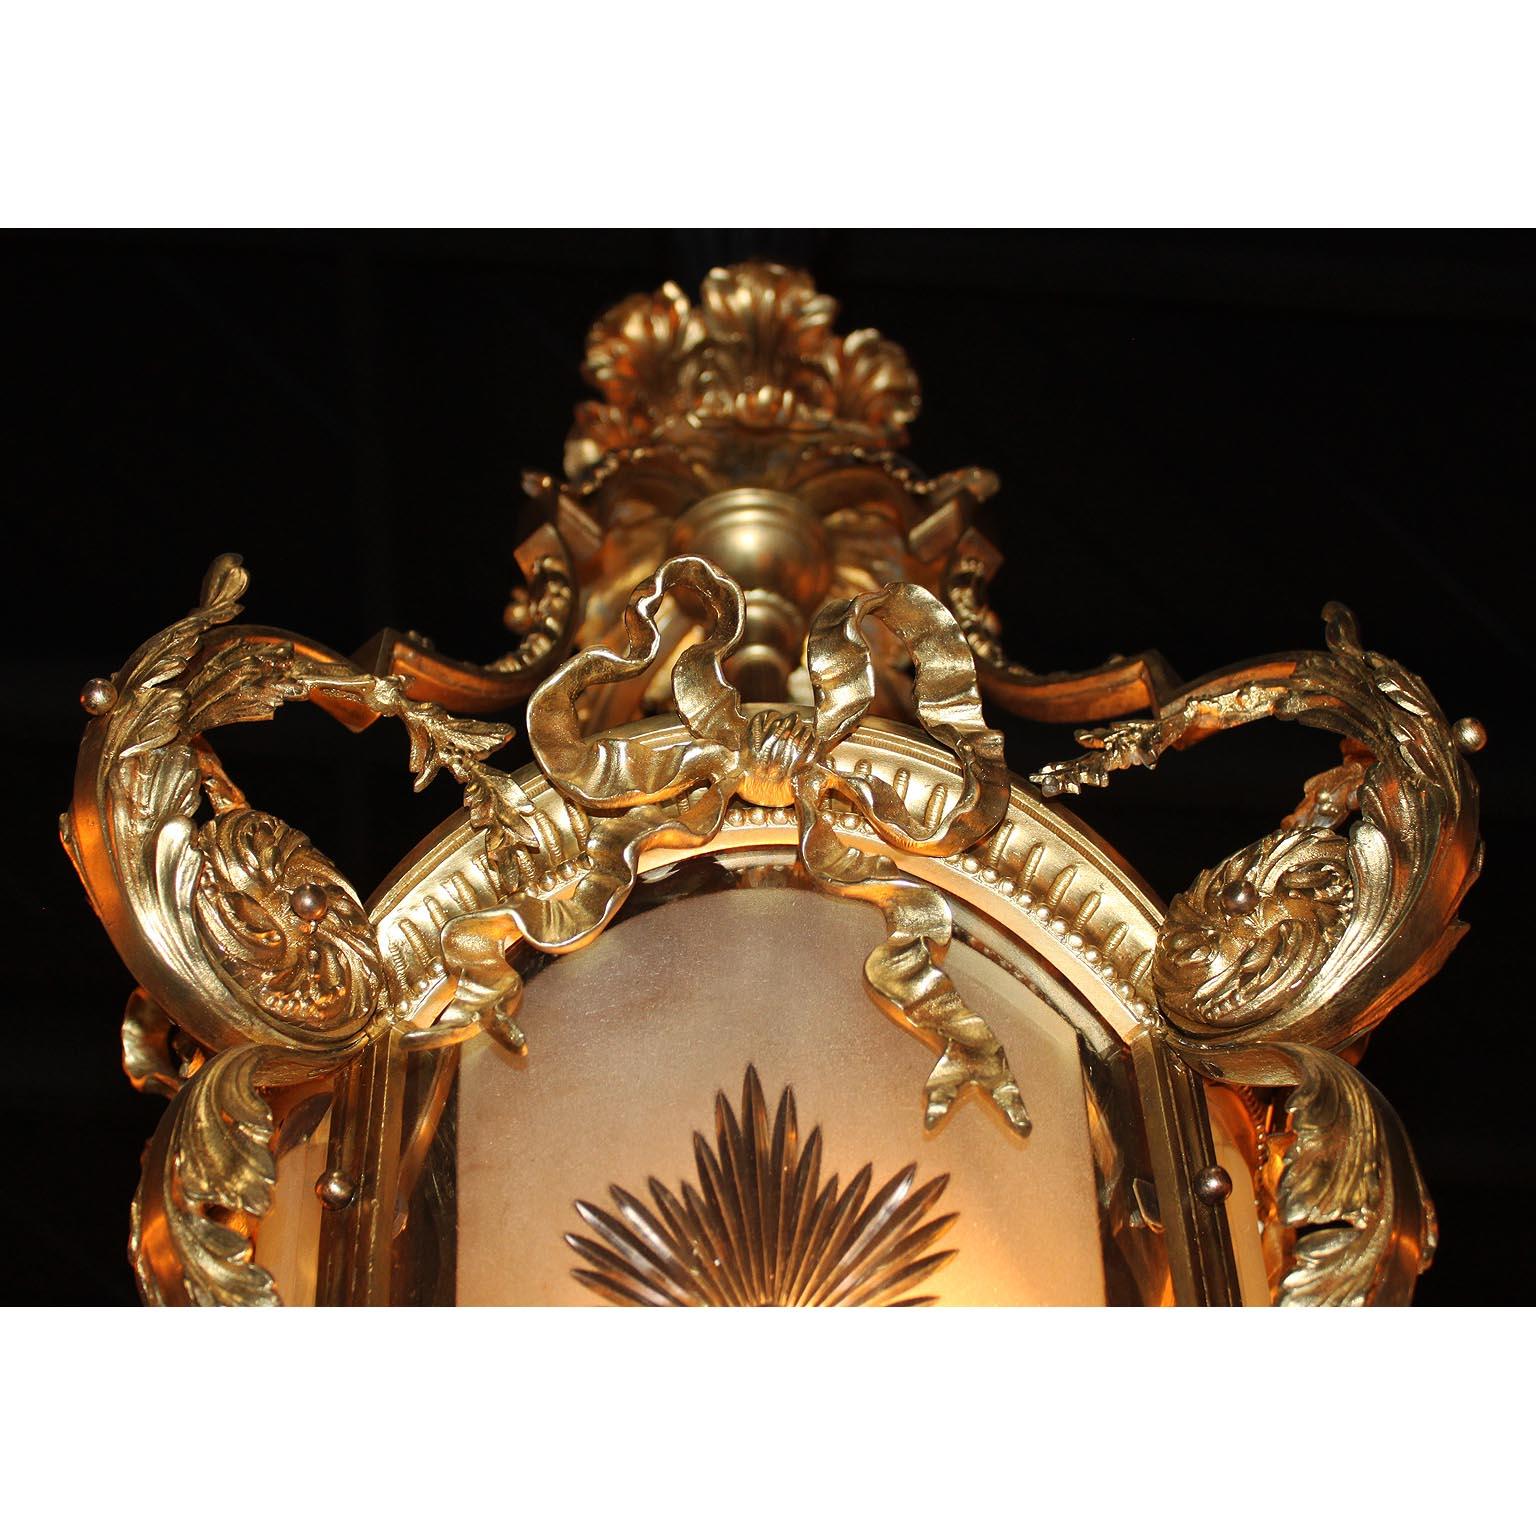 French, 19th-20th Century Louis XV Style Gilt Bronze and Glass Lantern For Sale 5